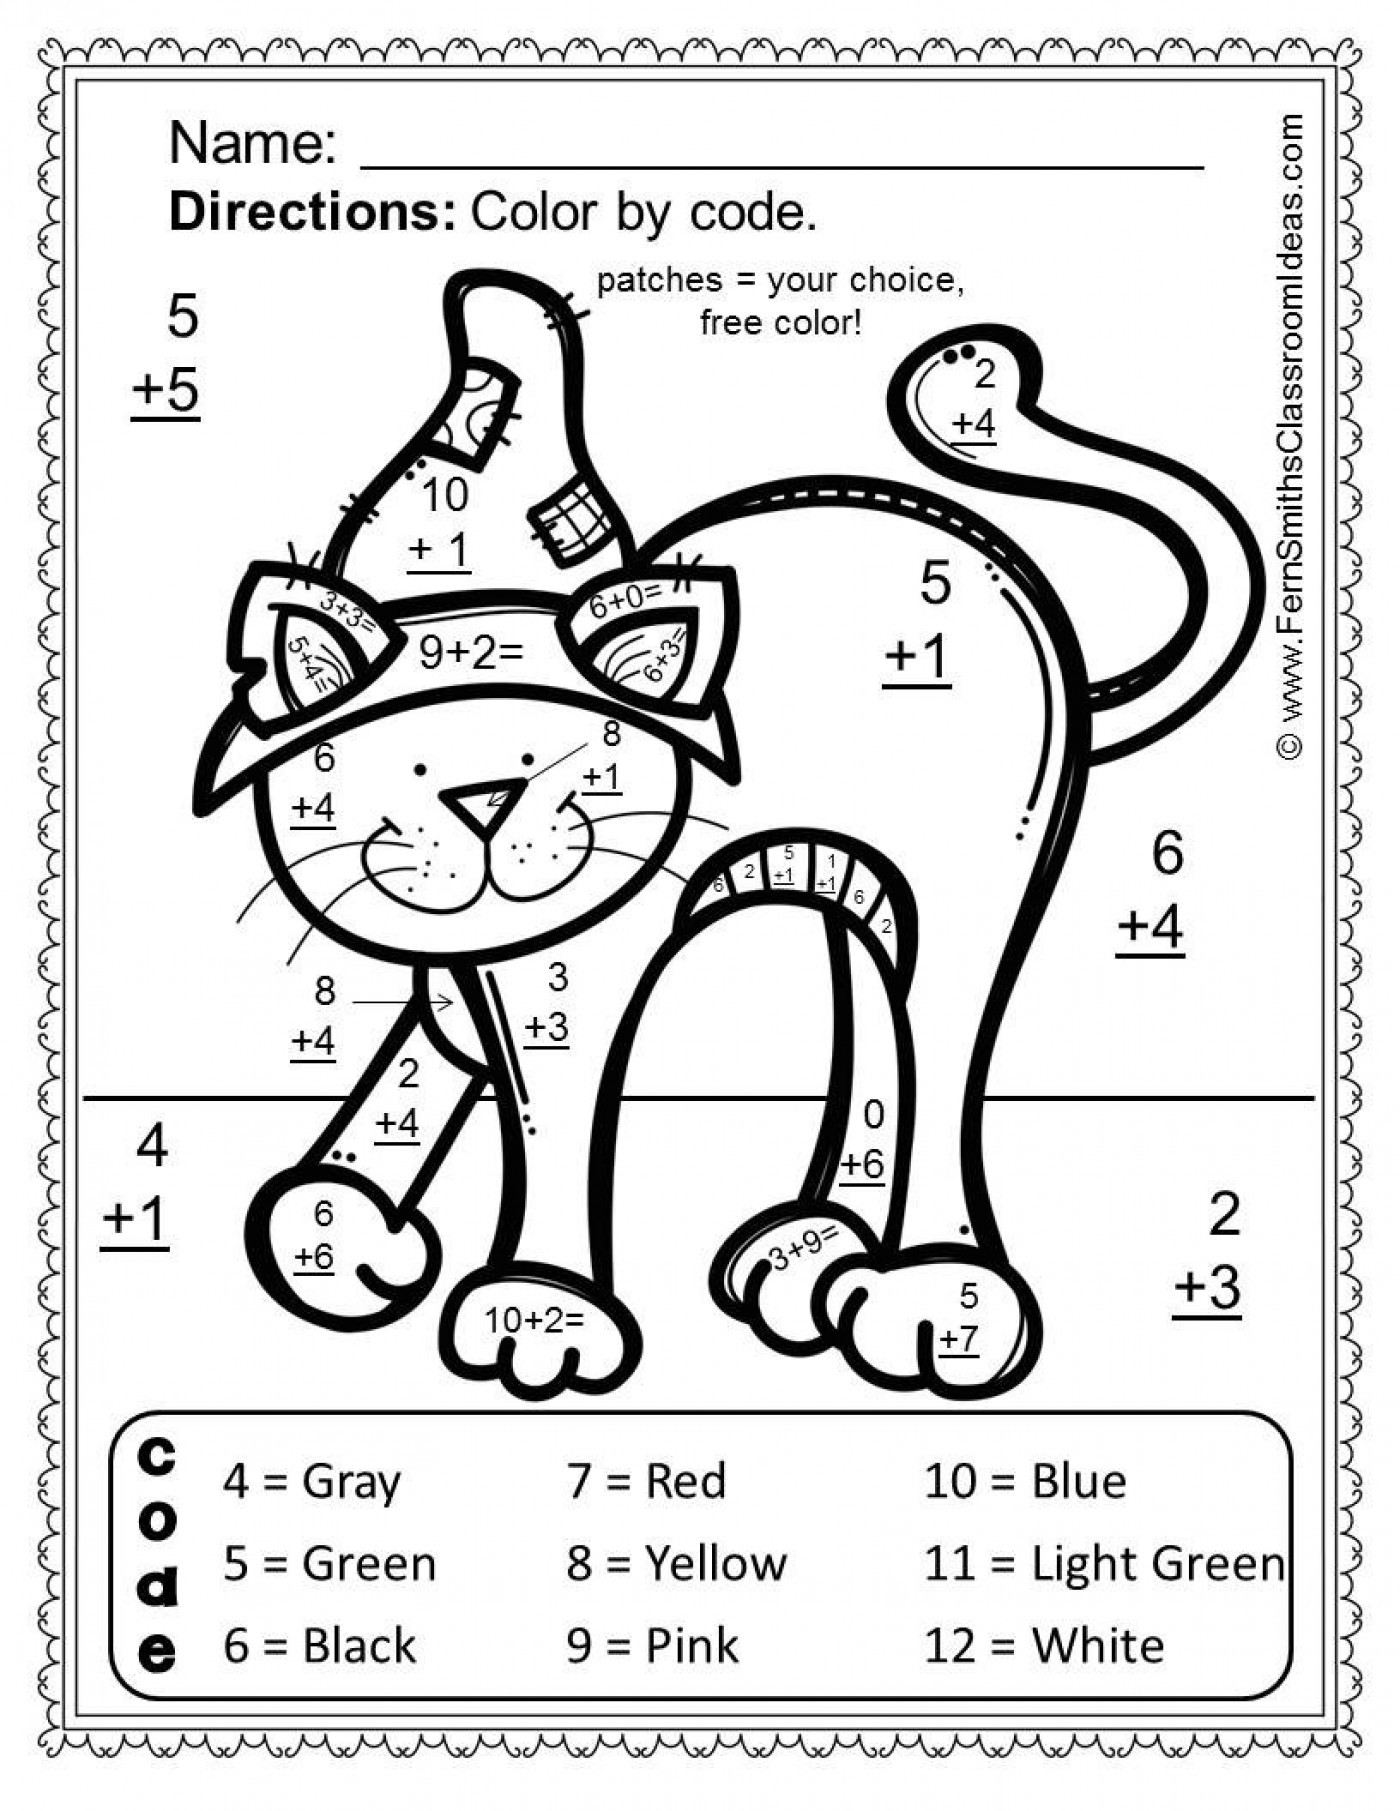 Free Math Worksheets Second Grade 2 Subtraction Subtract 2 Digit Number From whole Hundreds